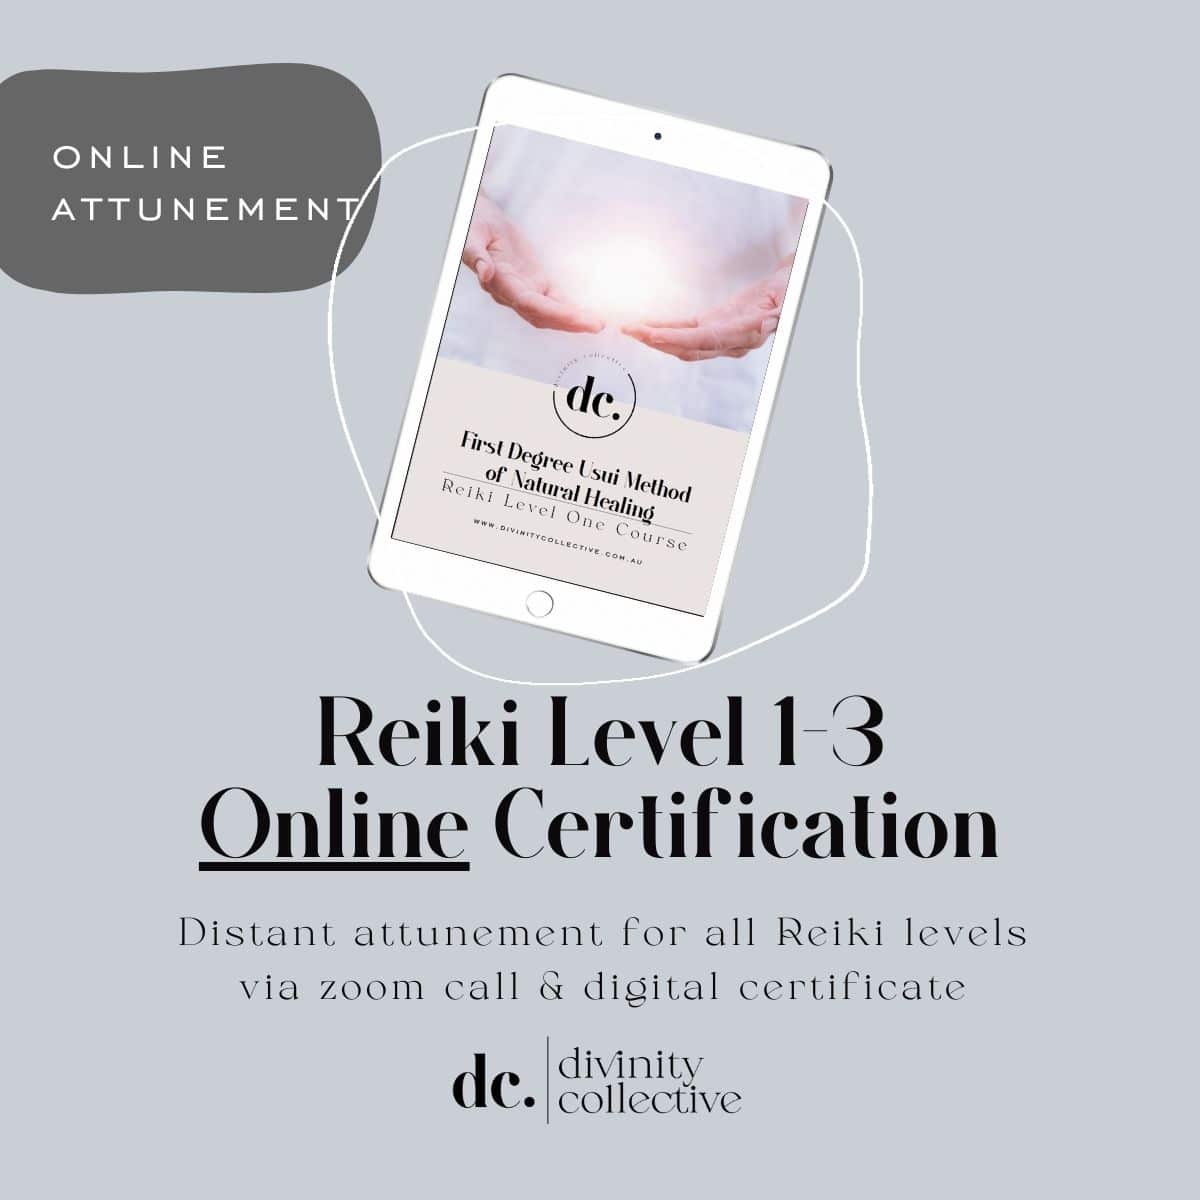 Online Reiki Course Training Level 1-3 Divinty Collective Certification